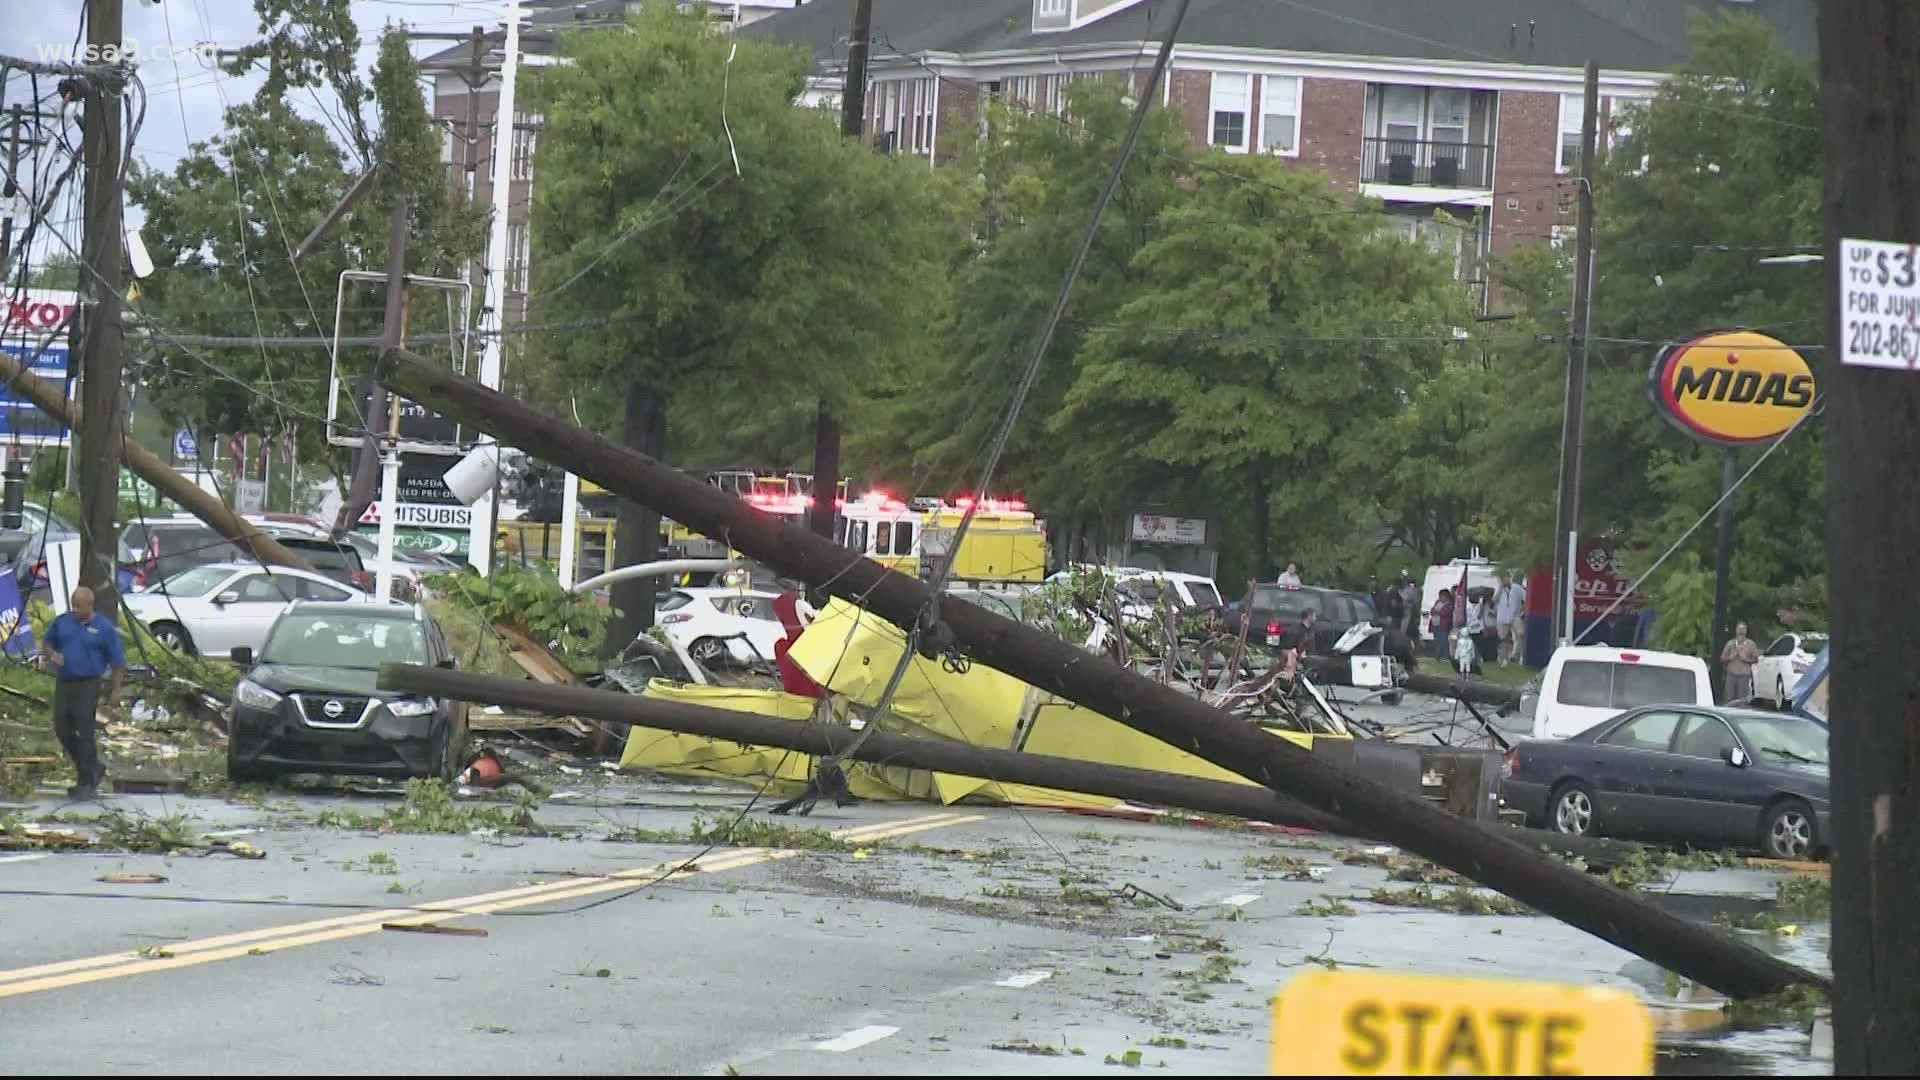 Downed trees and power wires, and damaged buildings, are some of the impacts that are being reported near Annapolis